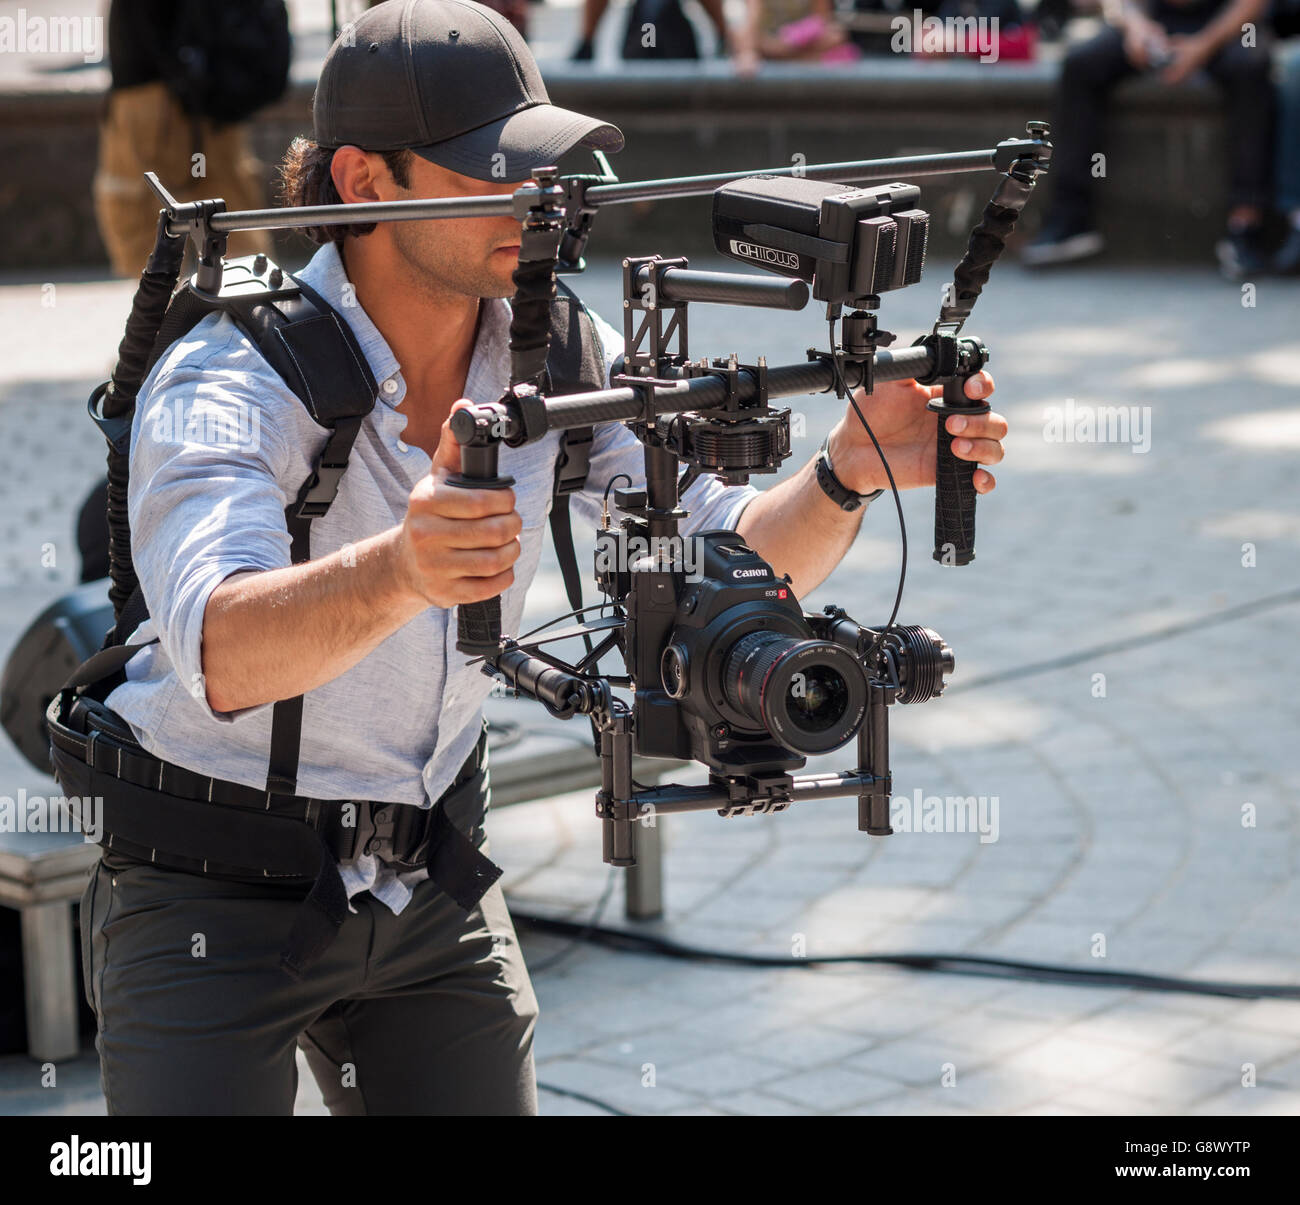 A videographer uses a Canon Eos C camera, on a stability rig with gimbal, in New York on Tuesday, June 21, 2016. (© Richard B. Levine) Stock Photo